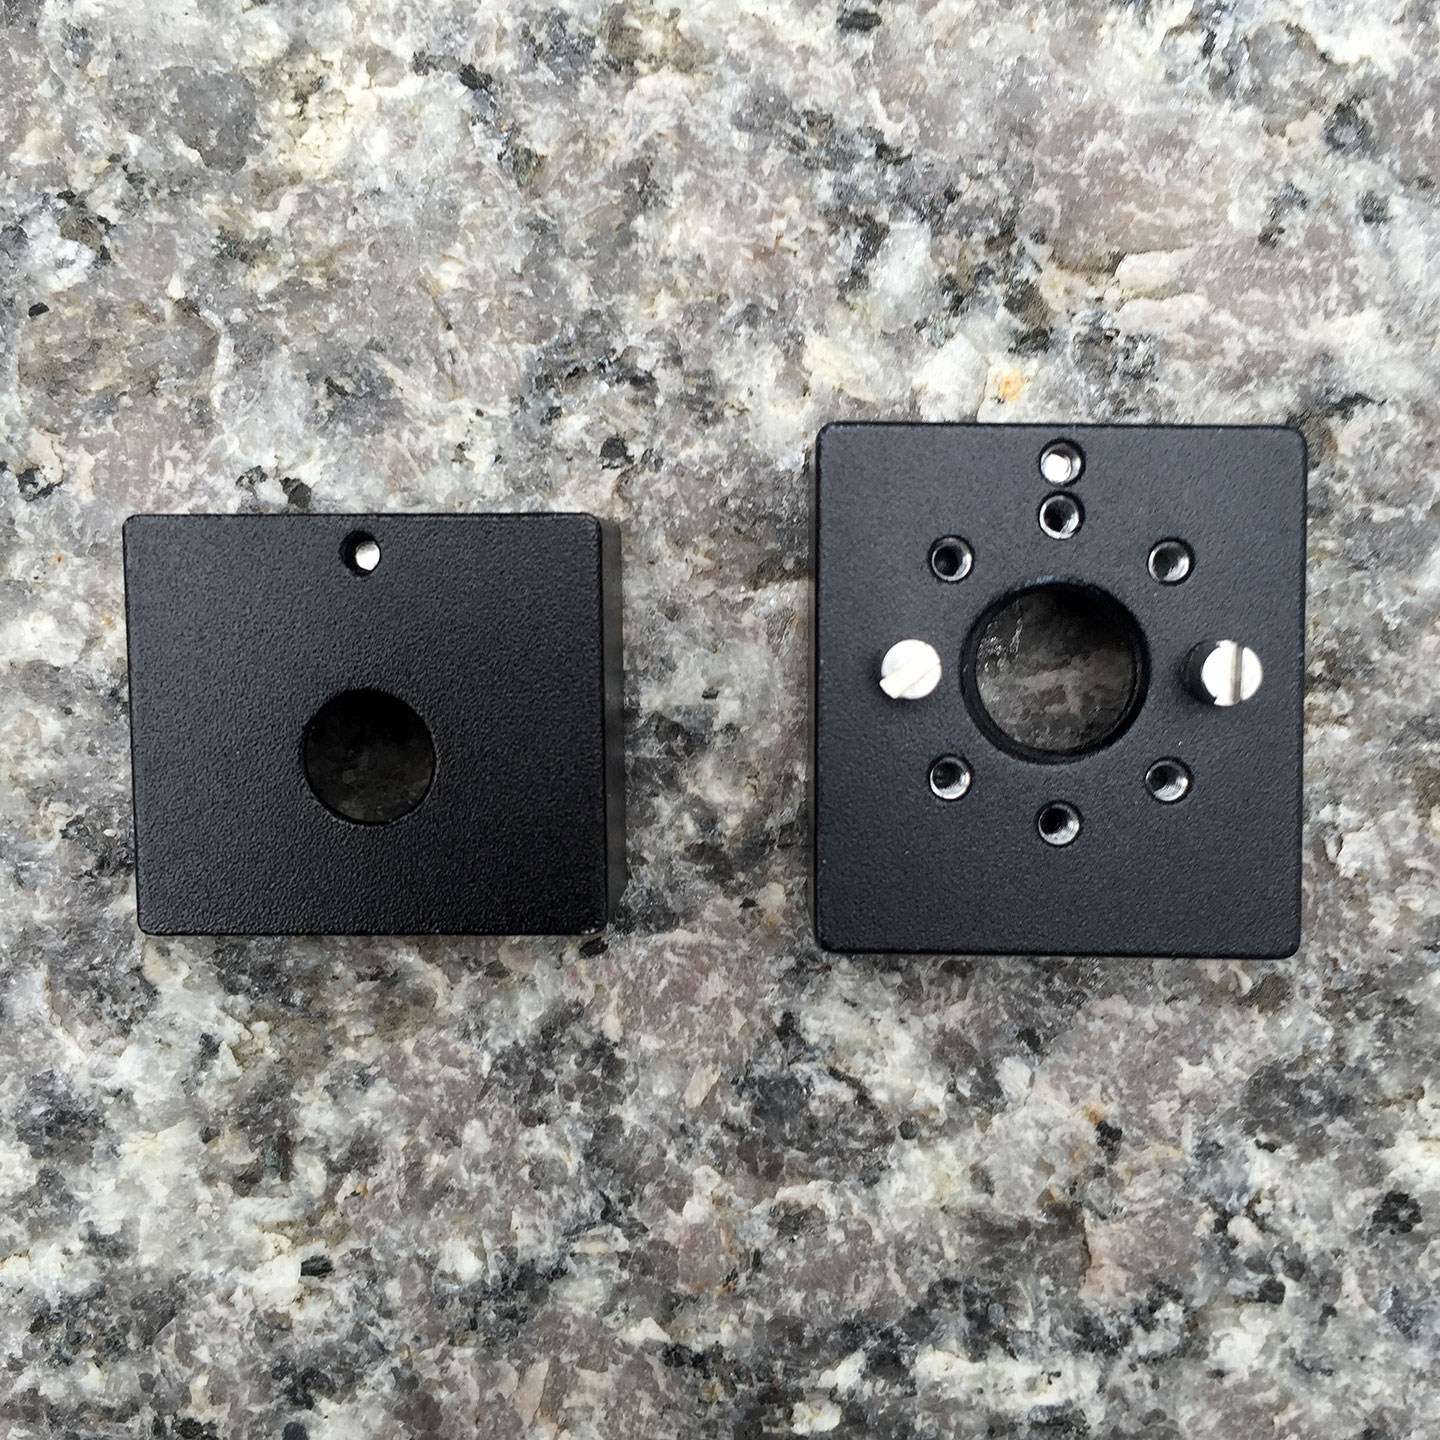 The bottom of Wooden Camera's ¼-20 Hot Shoe (left) vs. its Universal Hot Shoe. The latter is positionable and removable guide pins.